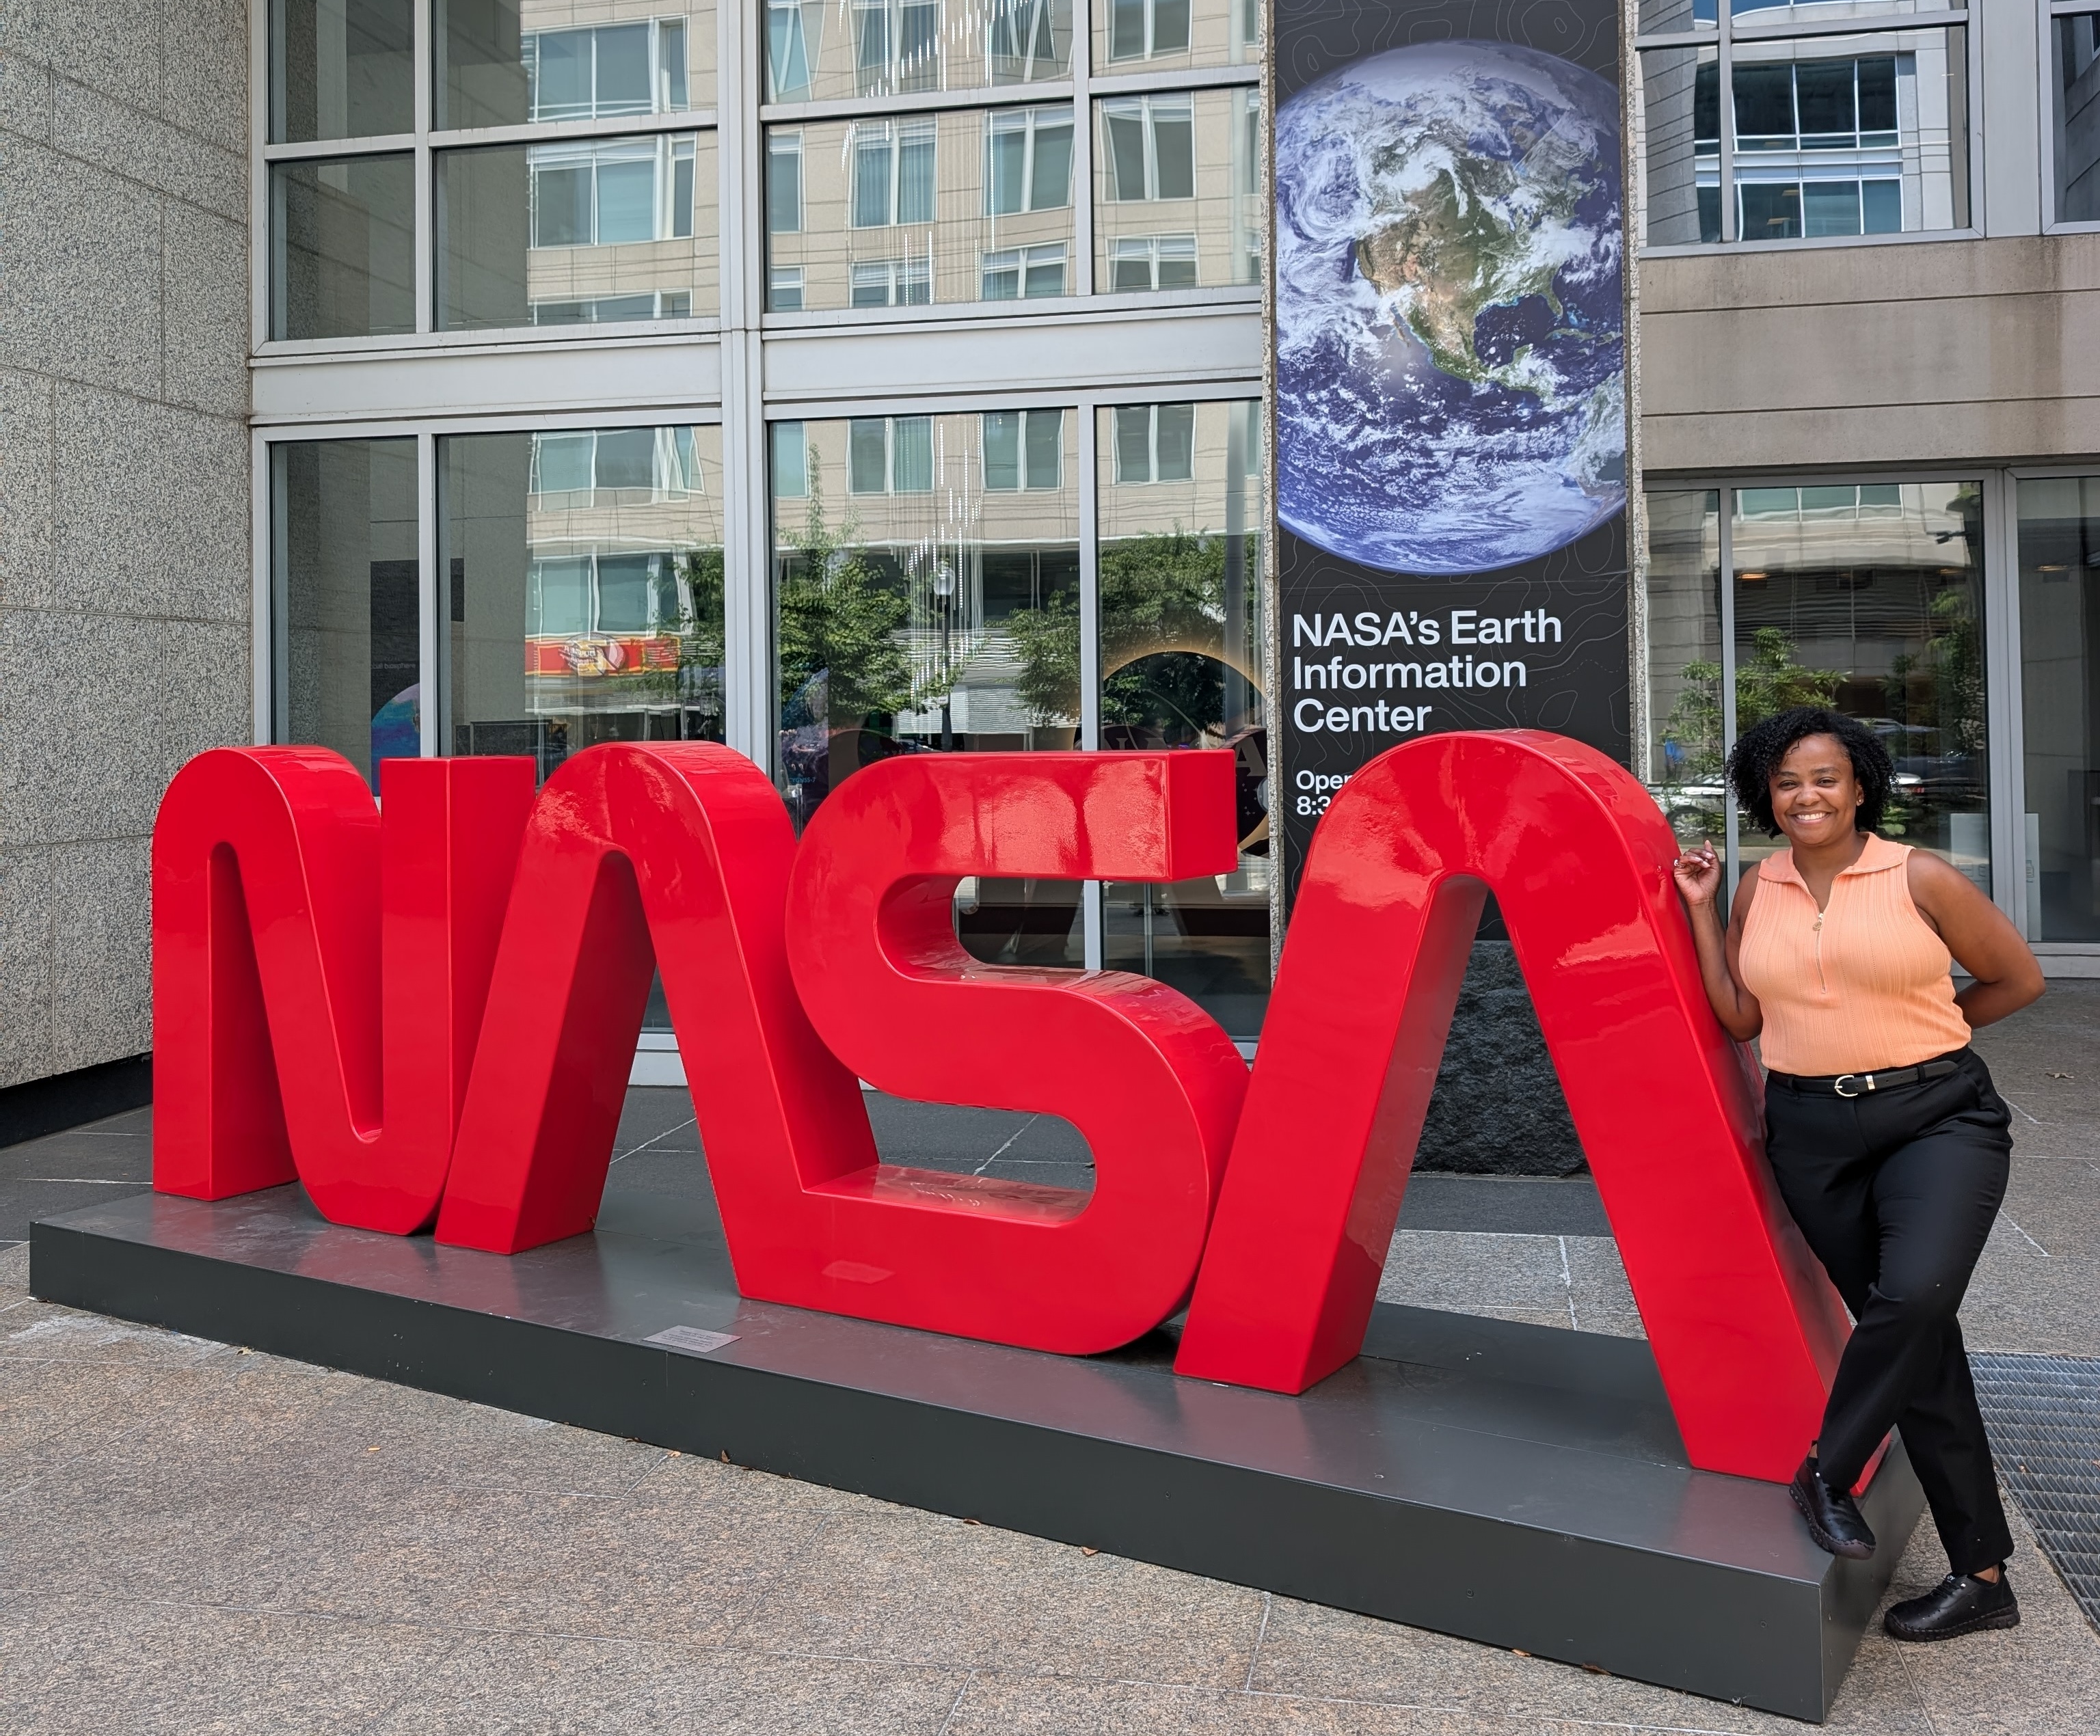 NASA intern Lena Young leans against a red NASA sign in front of NASA's Earth Information Center.